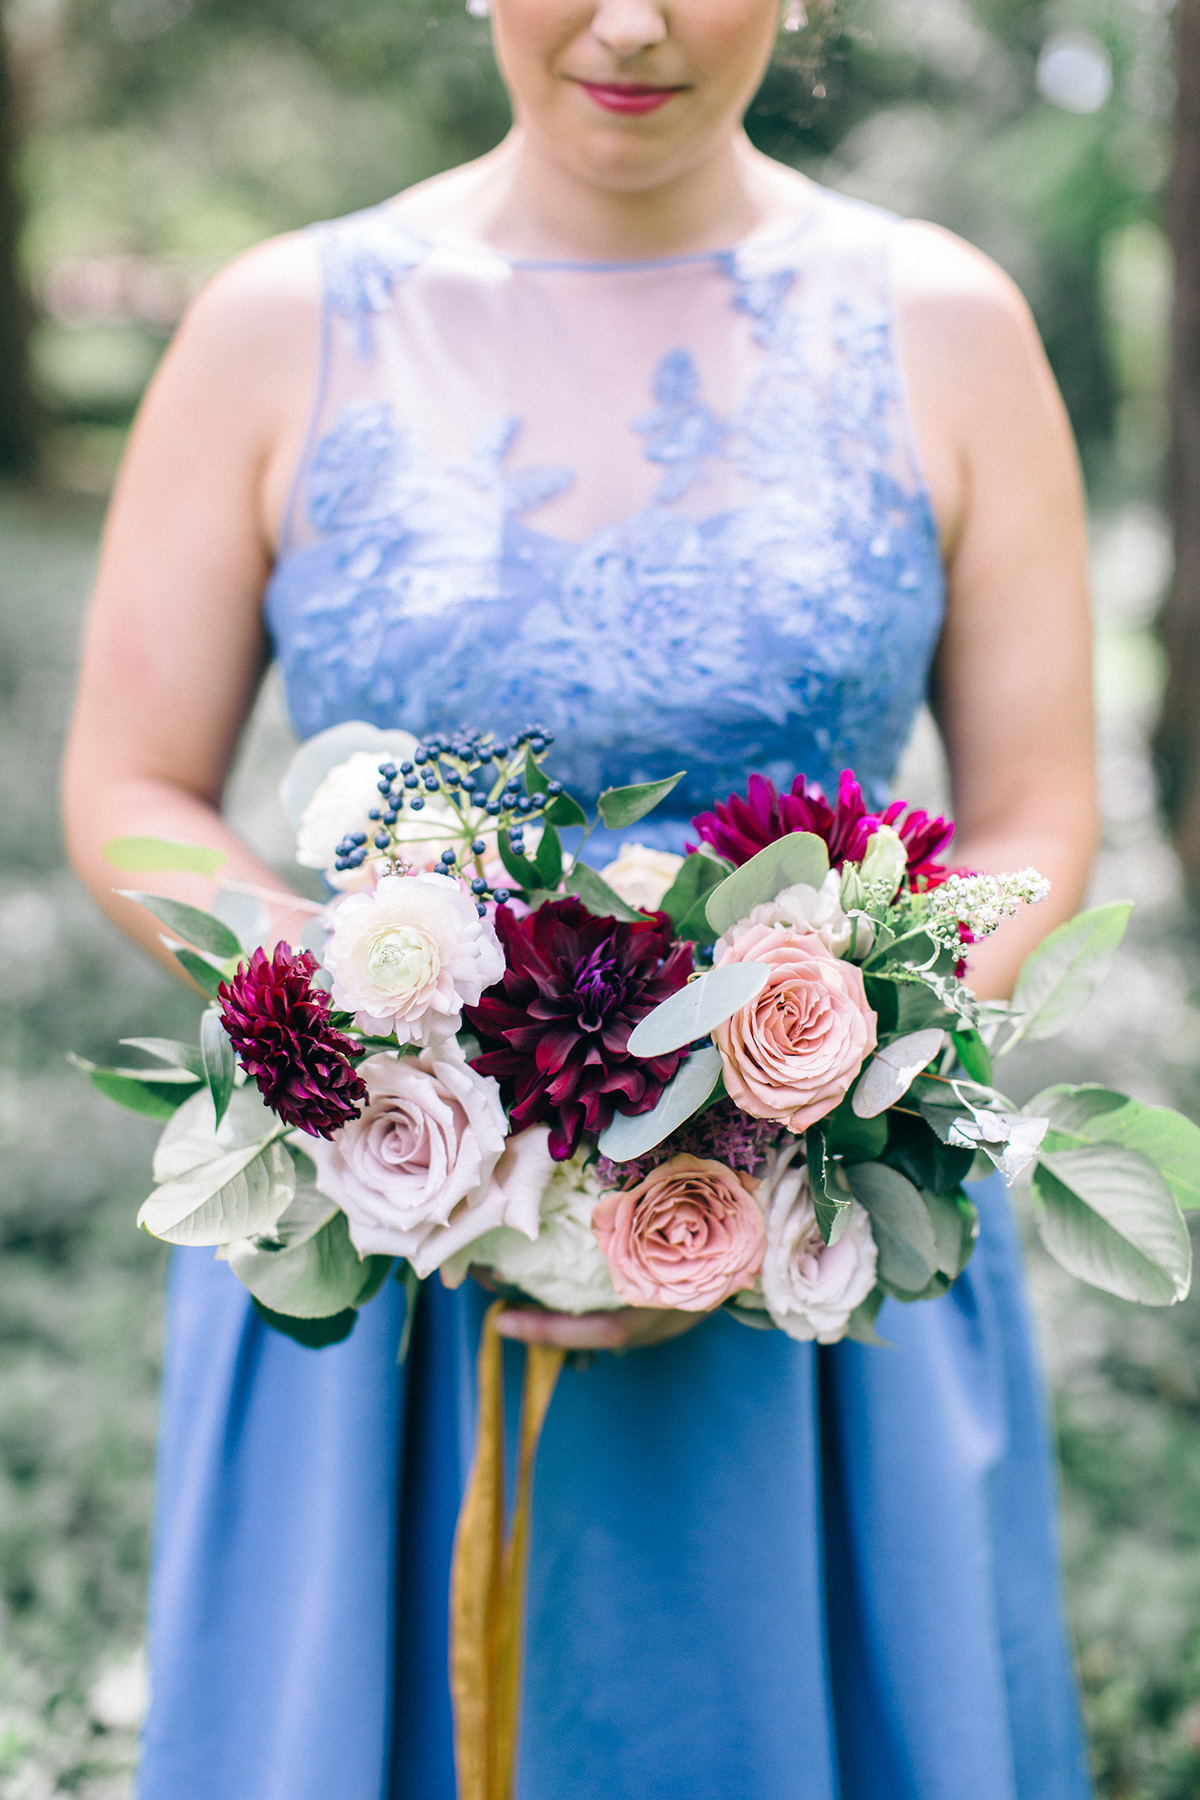 STYLED SHOOT | Romantic Wine, Navy and Blush Wedding Inspiration featuring David's Bridal | Pretty Pear Bride